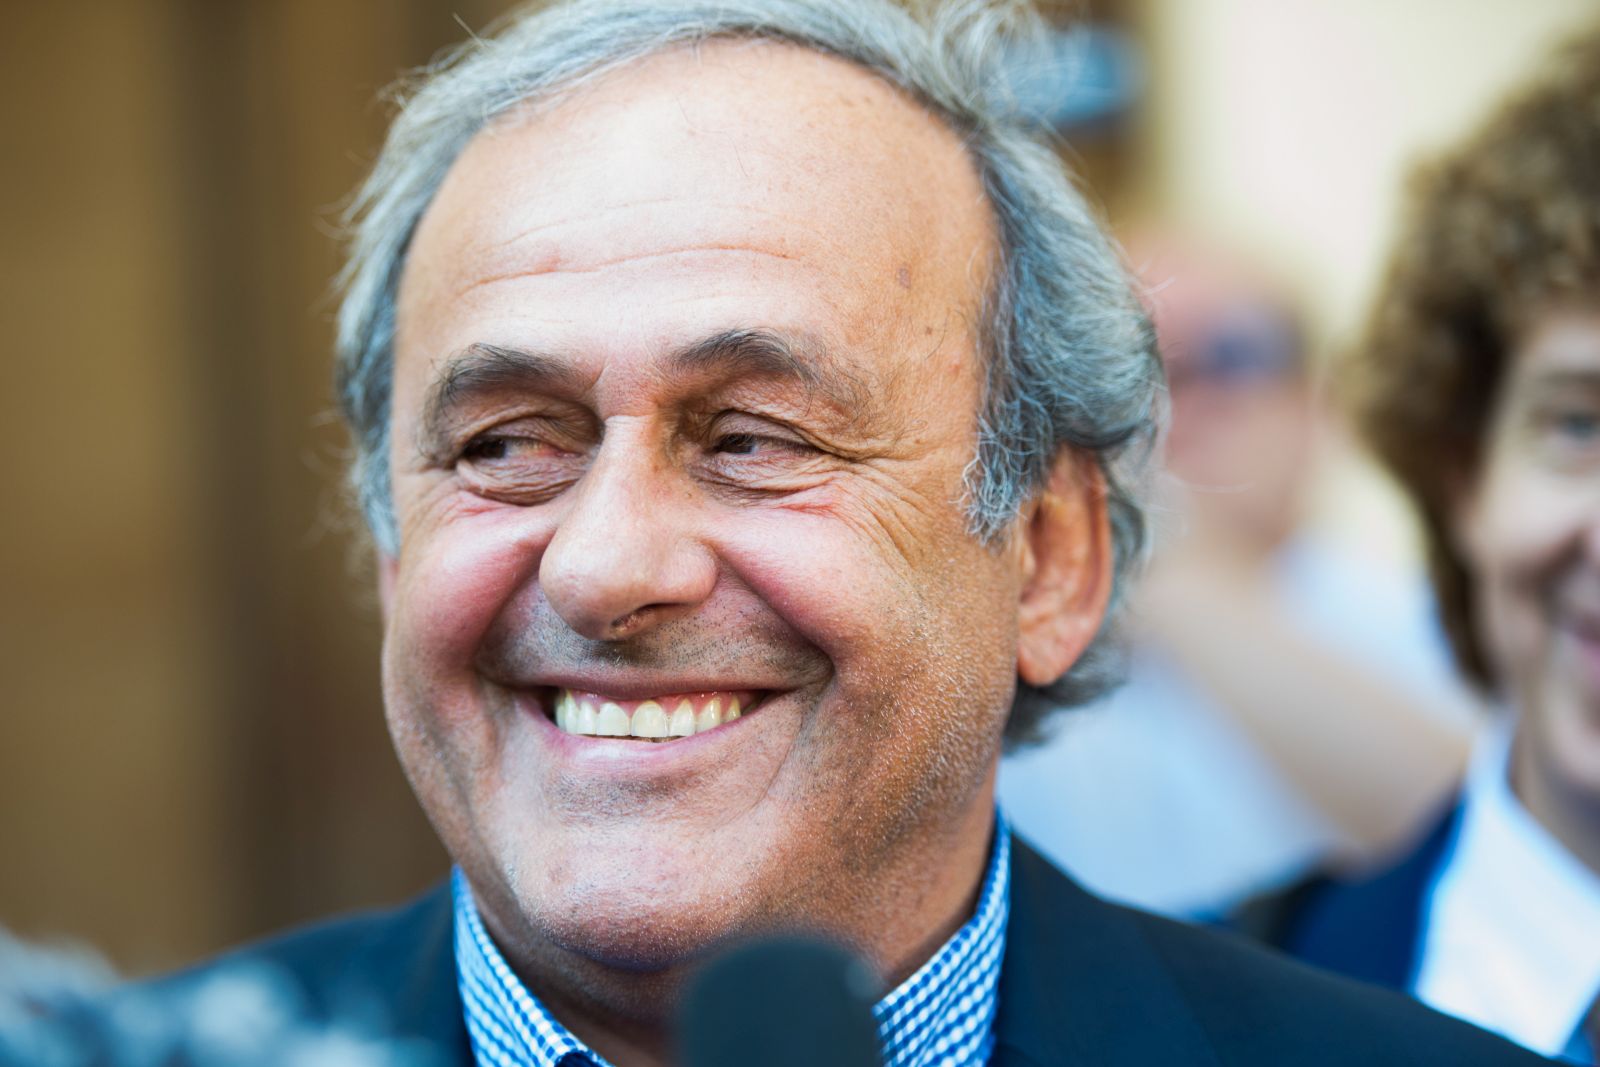 epa10058806 The former president of the the European Football Association UEFA Michel Platini smiles in front of the Swiss Federal Criminal Court after the verdict has been announced, in Bellinzona, Switzerland, 08 July 2022. The trial ended with an acquittal. Former Fifa President Joseph Blatter and Platini, stood trial before the Federal Criminal Court over a suspicious two-million payment. The Federal Prosecutor's Office accused them of fraud. The defense spoke of a conspiracy.  EPA/ALESSANDRO CRINARI